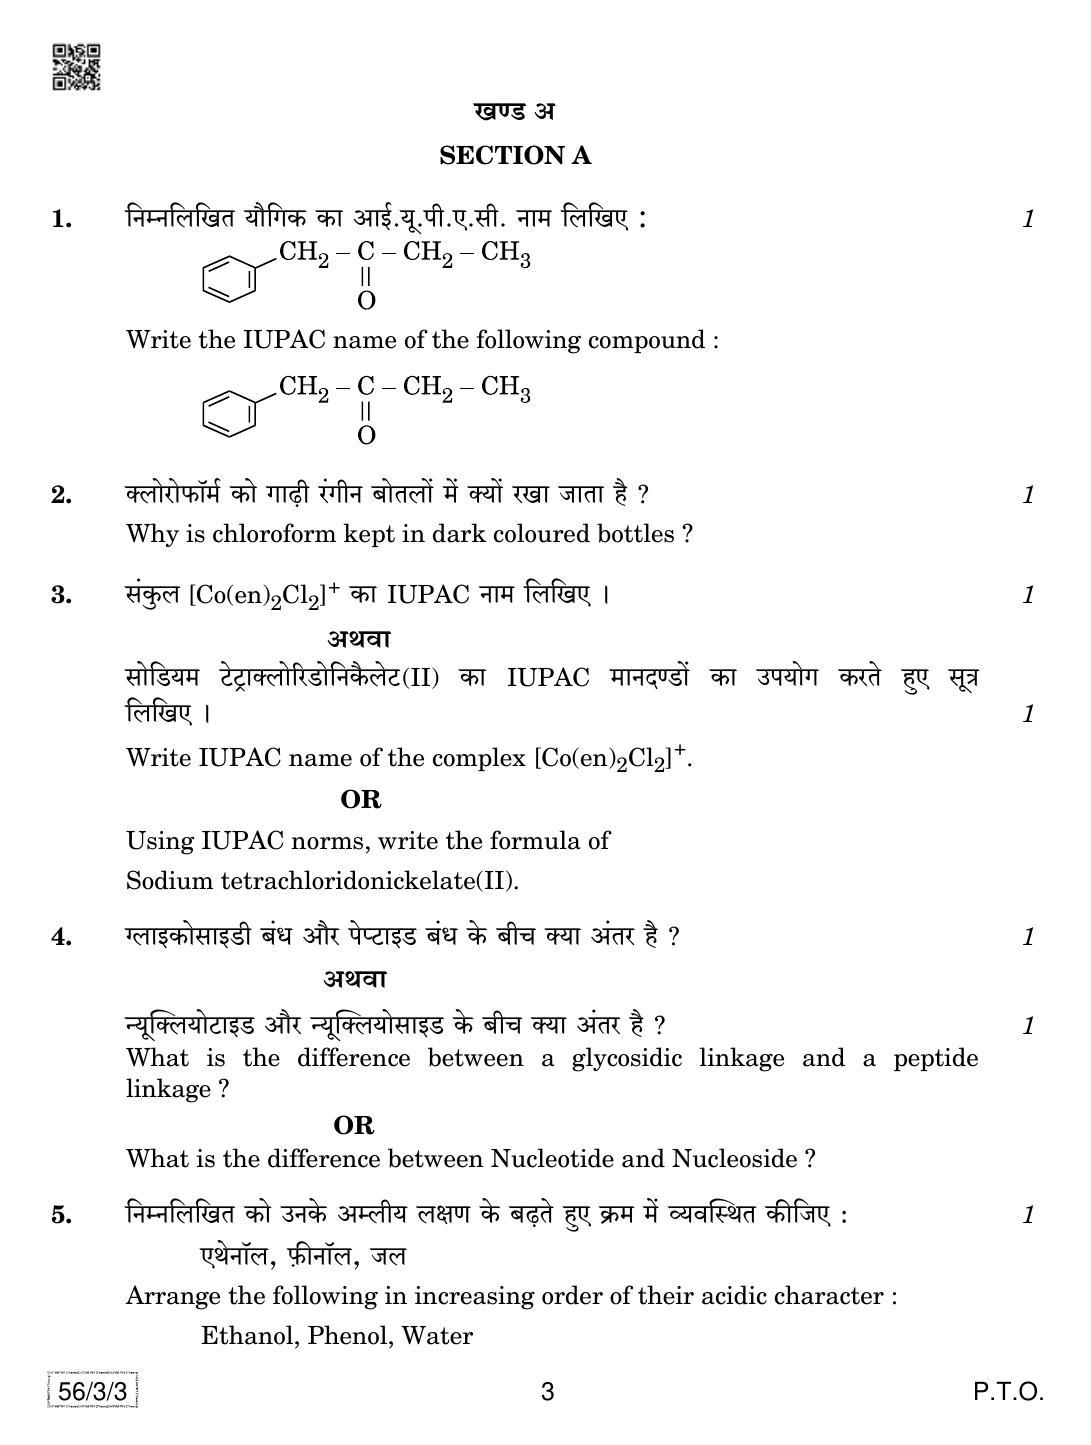 CBSE Class 12 56-3-3 Chemistry 2019 Question Paper - Page 3